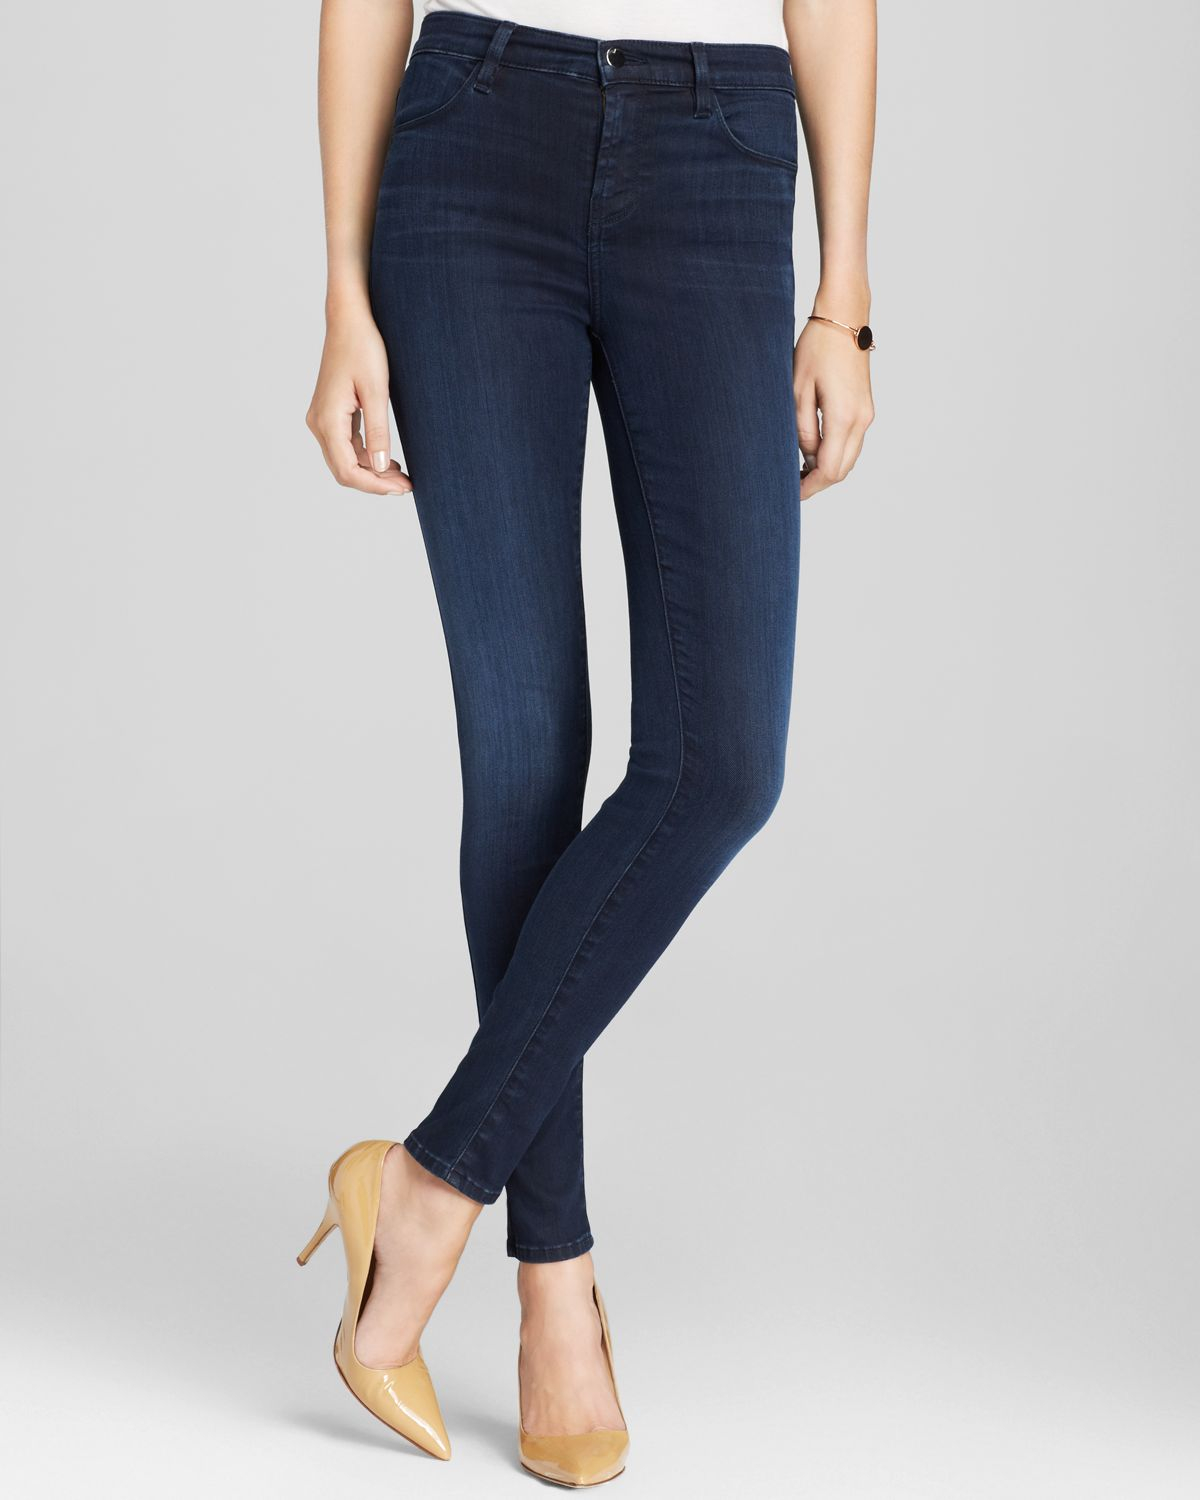 J Brand Maria High Rise Skinny Jeans In Darkness in Black | Lyst